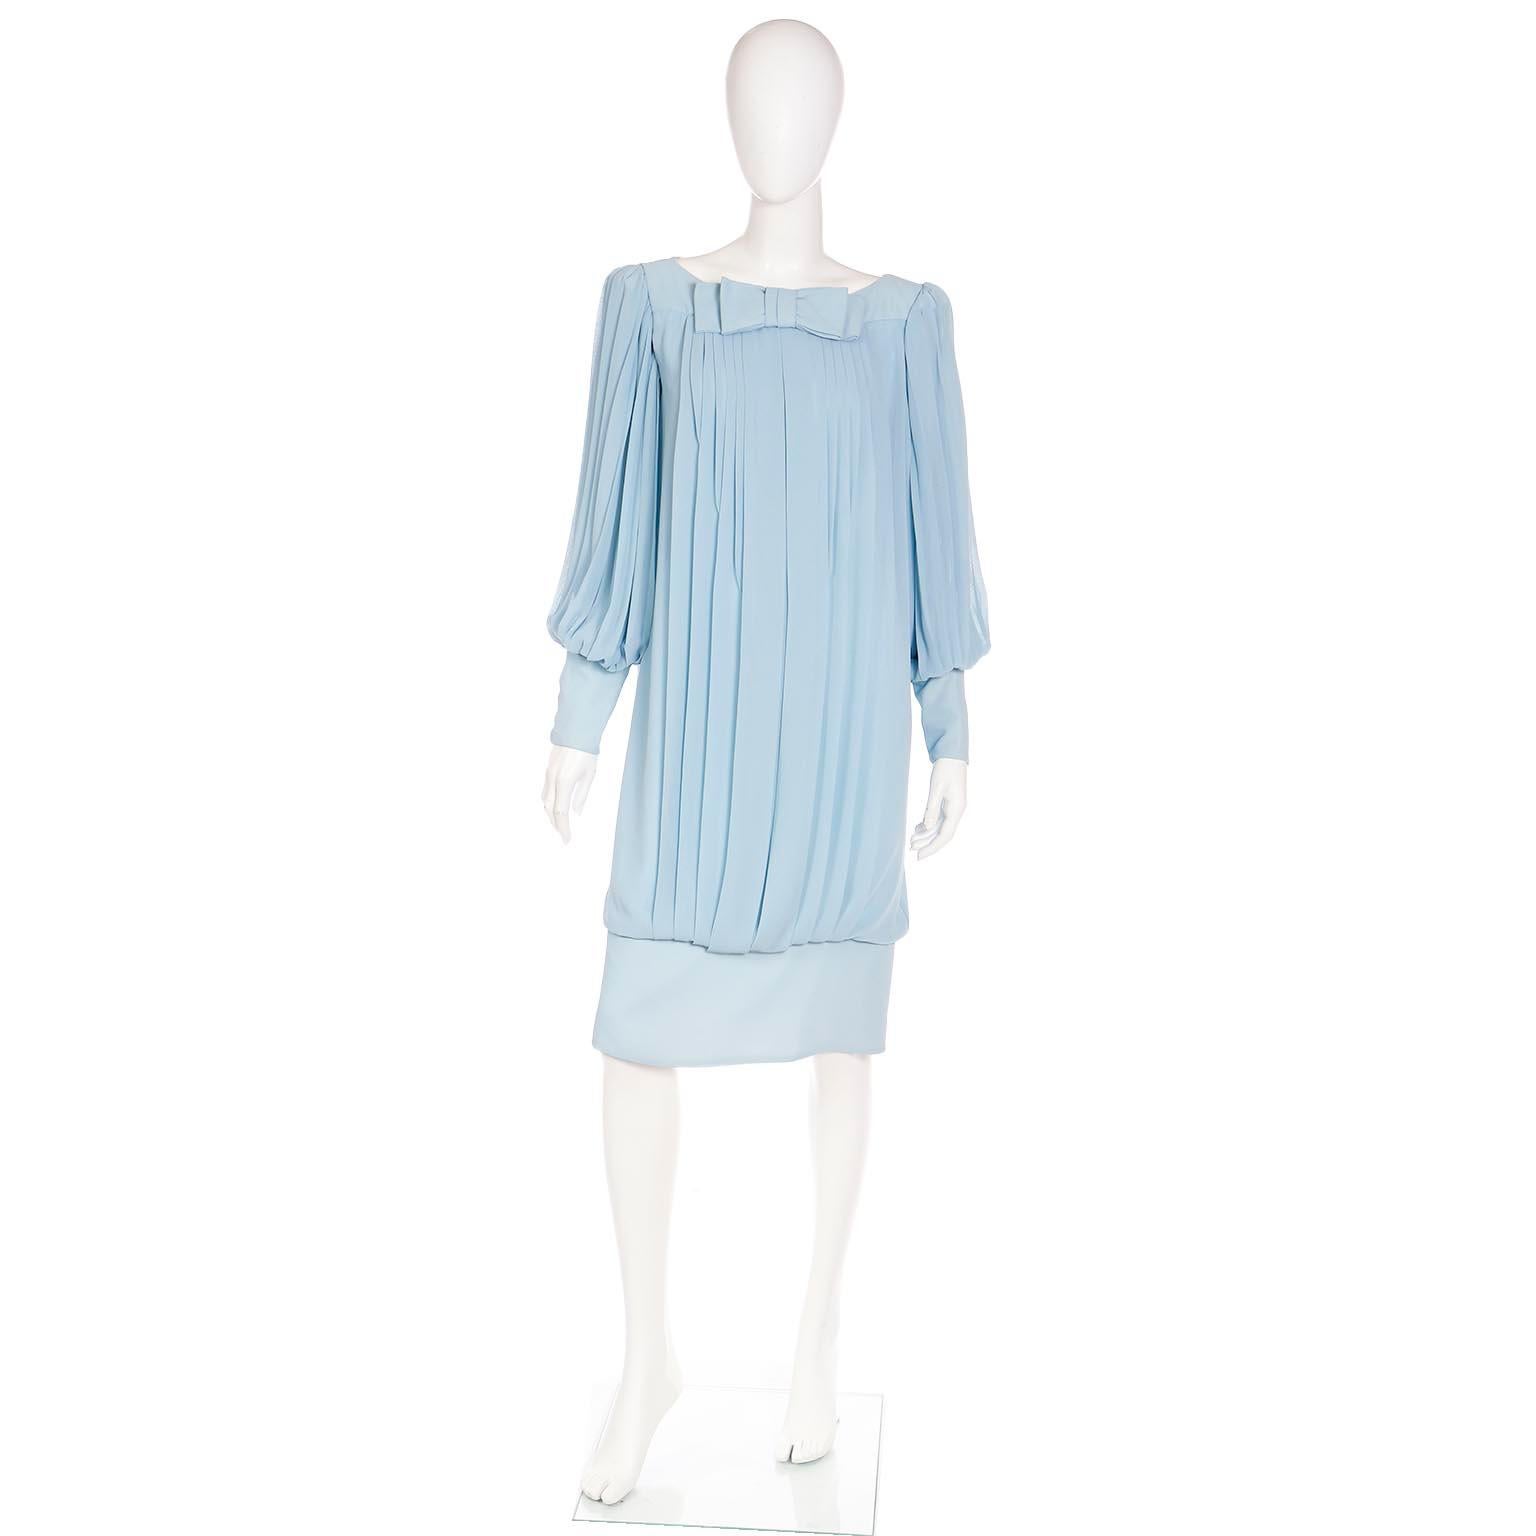 We love unique vintage 1960's dresses and this is such a fabulous blue silk chiffon evening or day dress with a banded hemline in a loosely draped pleated style. The dress has a bow at the center of the neckline and we love the lovely bishop sleeves